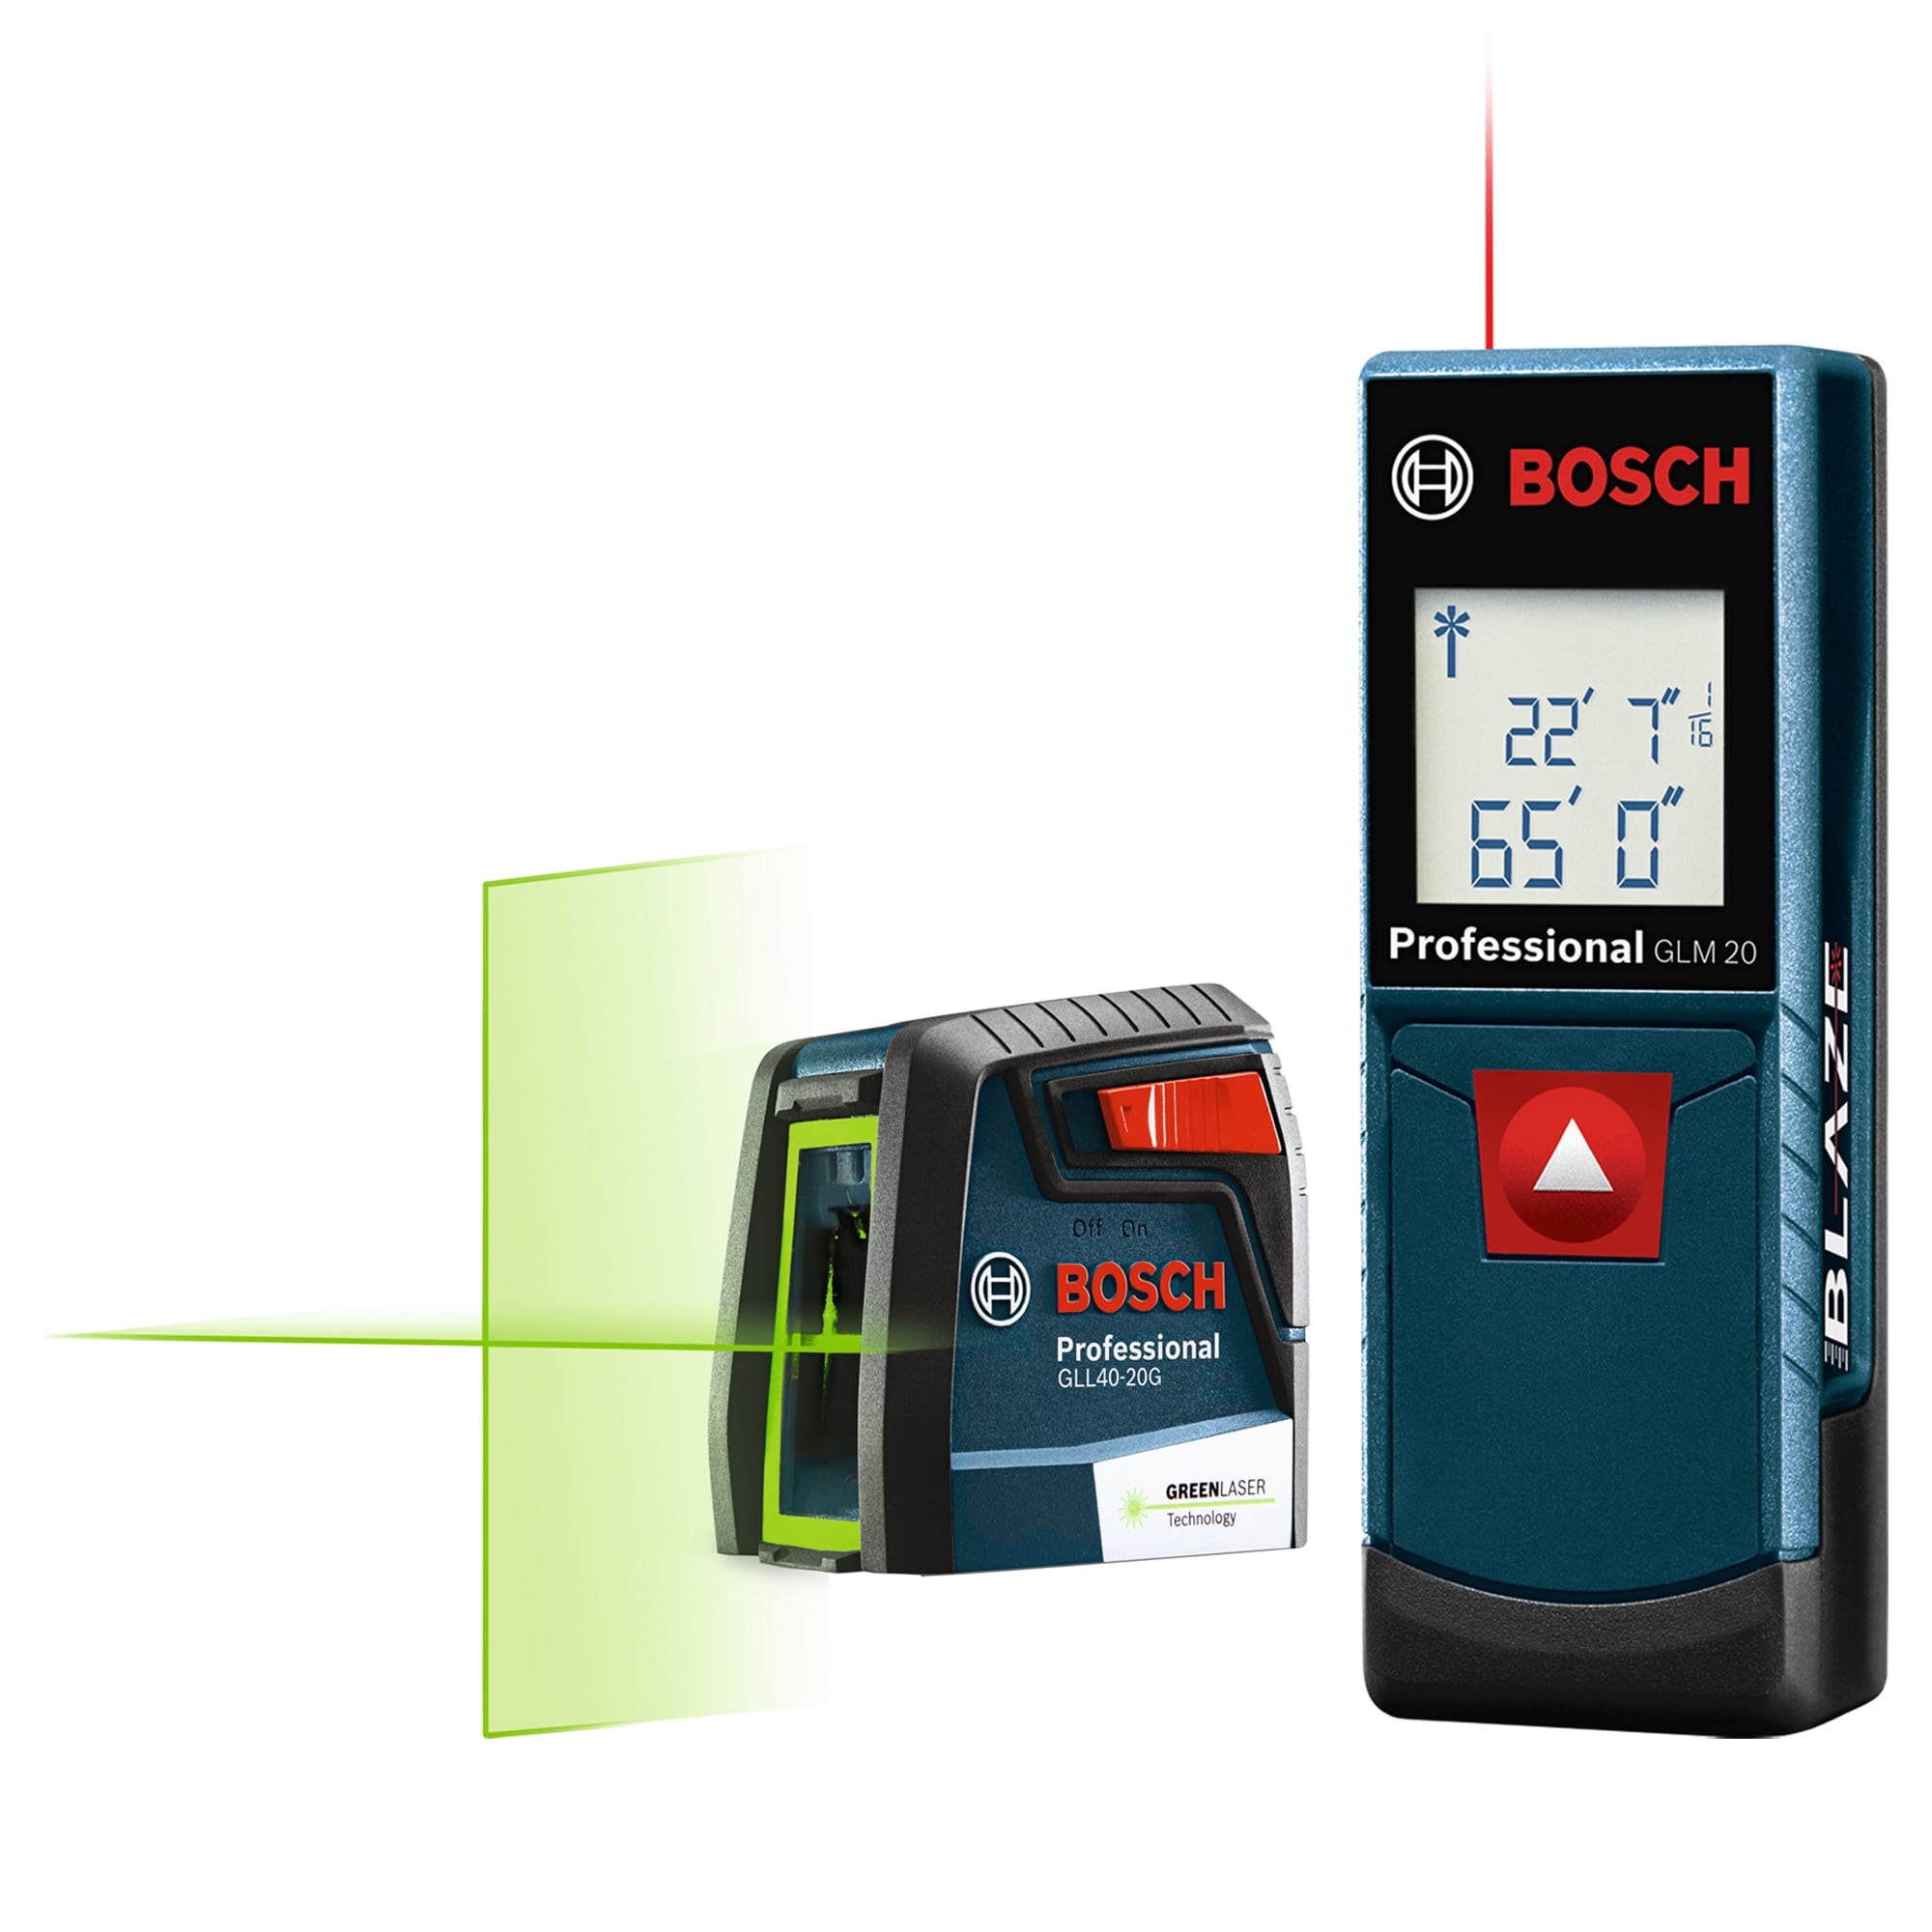 Bosch MM 2 Flexible Mounting Device & GLM 20 Compact Laser Distance Measure 